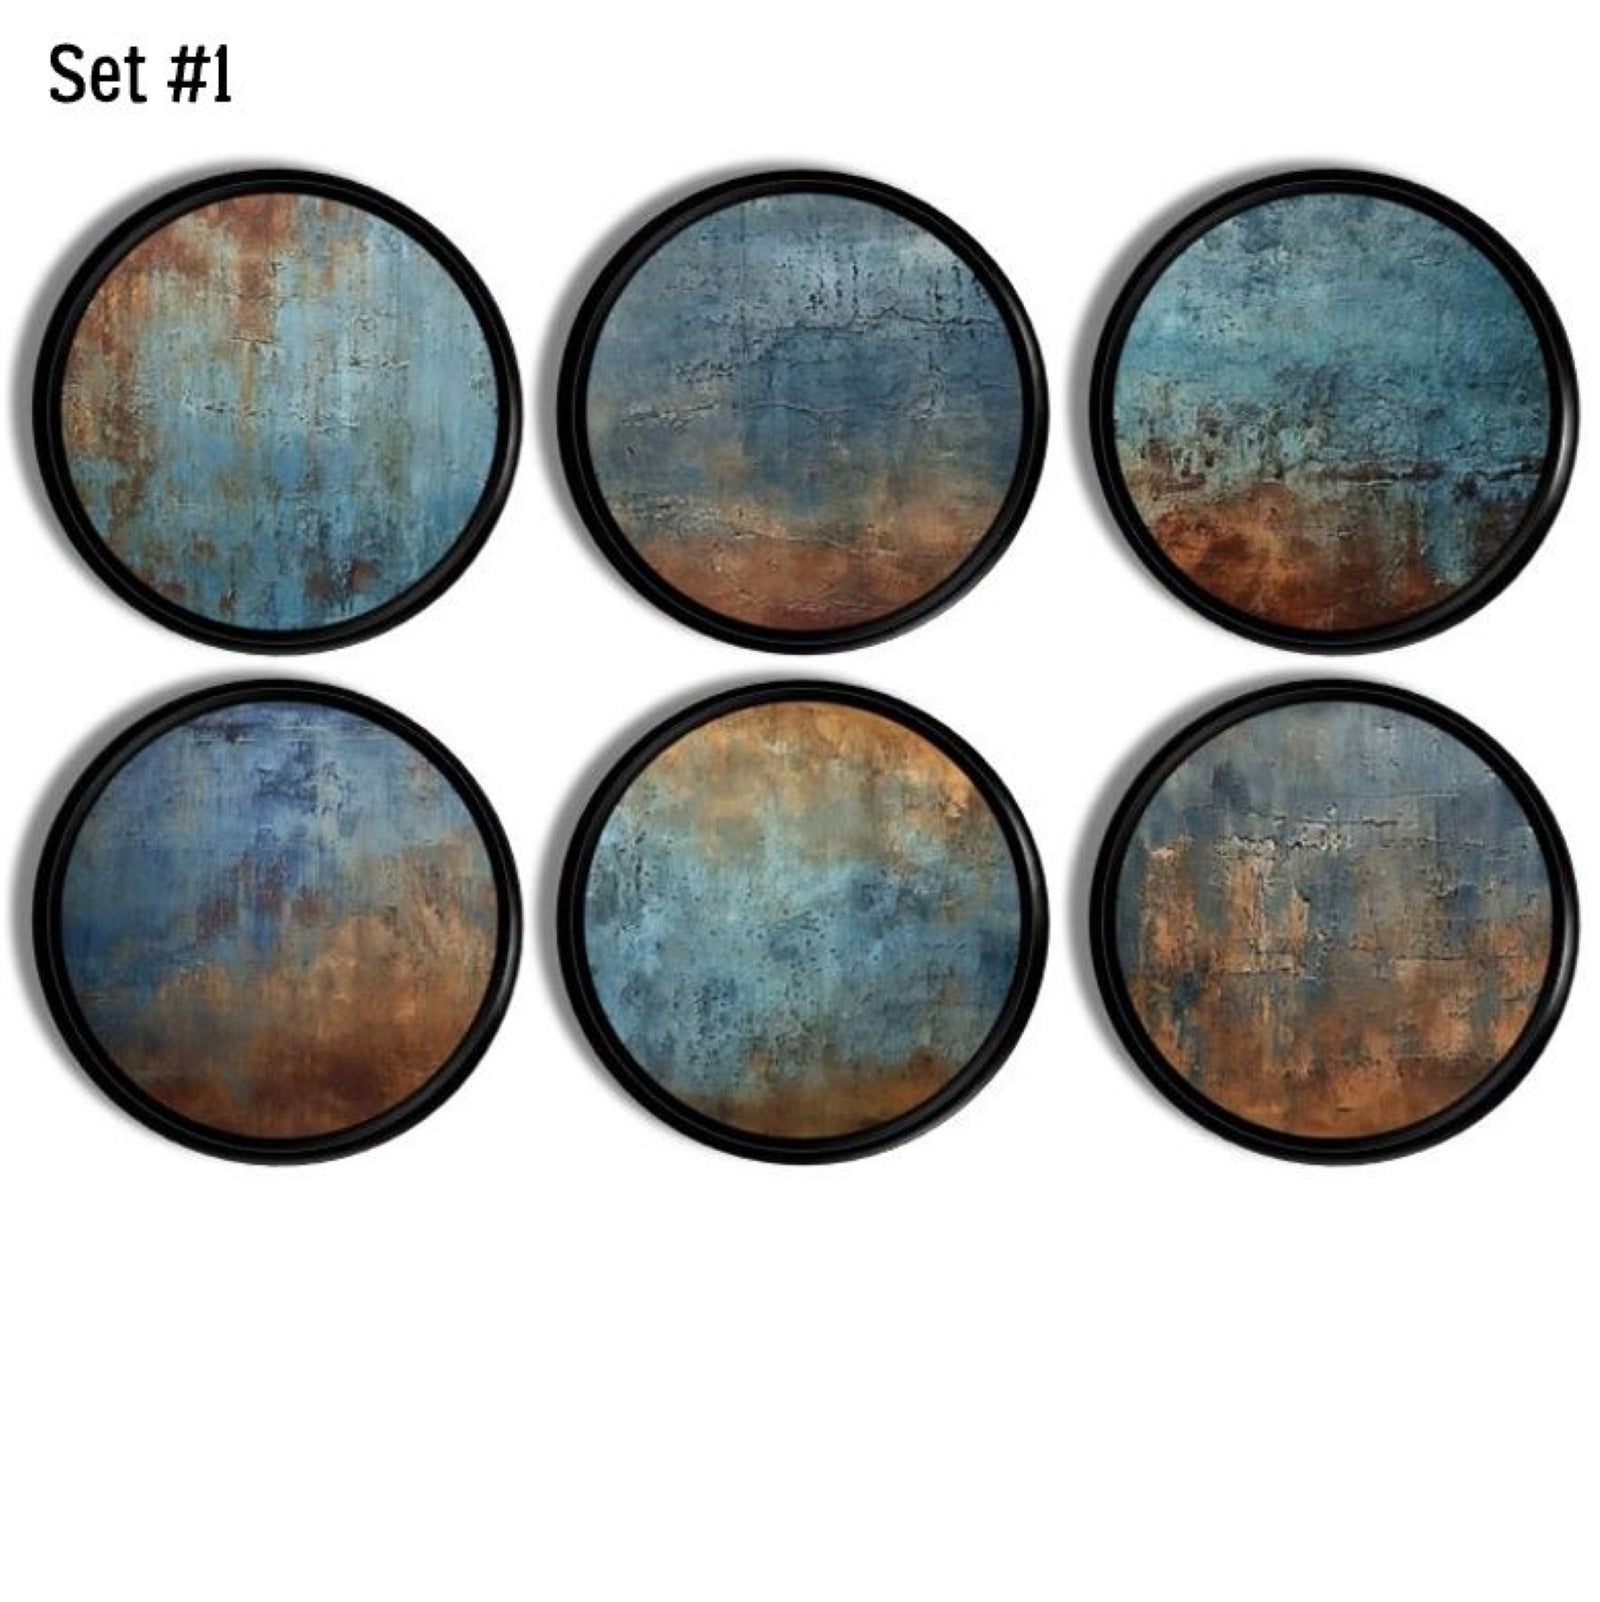 Decorative cabinet knobs in a faux weathered paint texture theme. Rust and navy blue peeling paint look on a black drawer pull. Rustic gruge industral or abstract art decor.